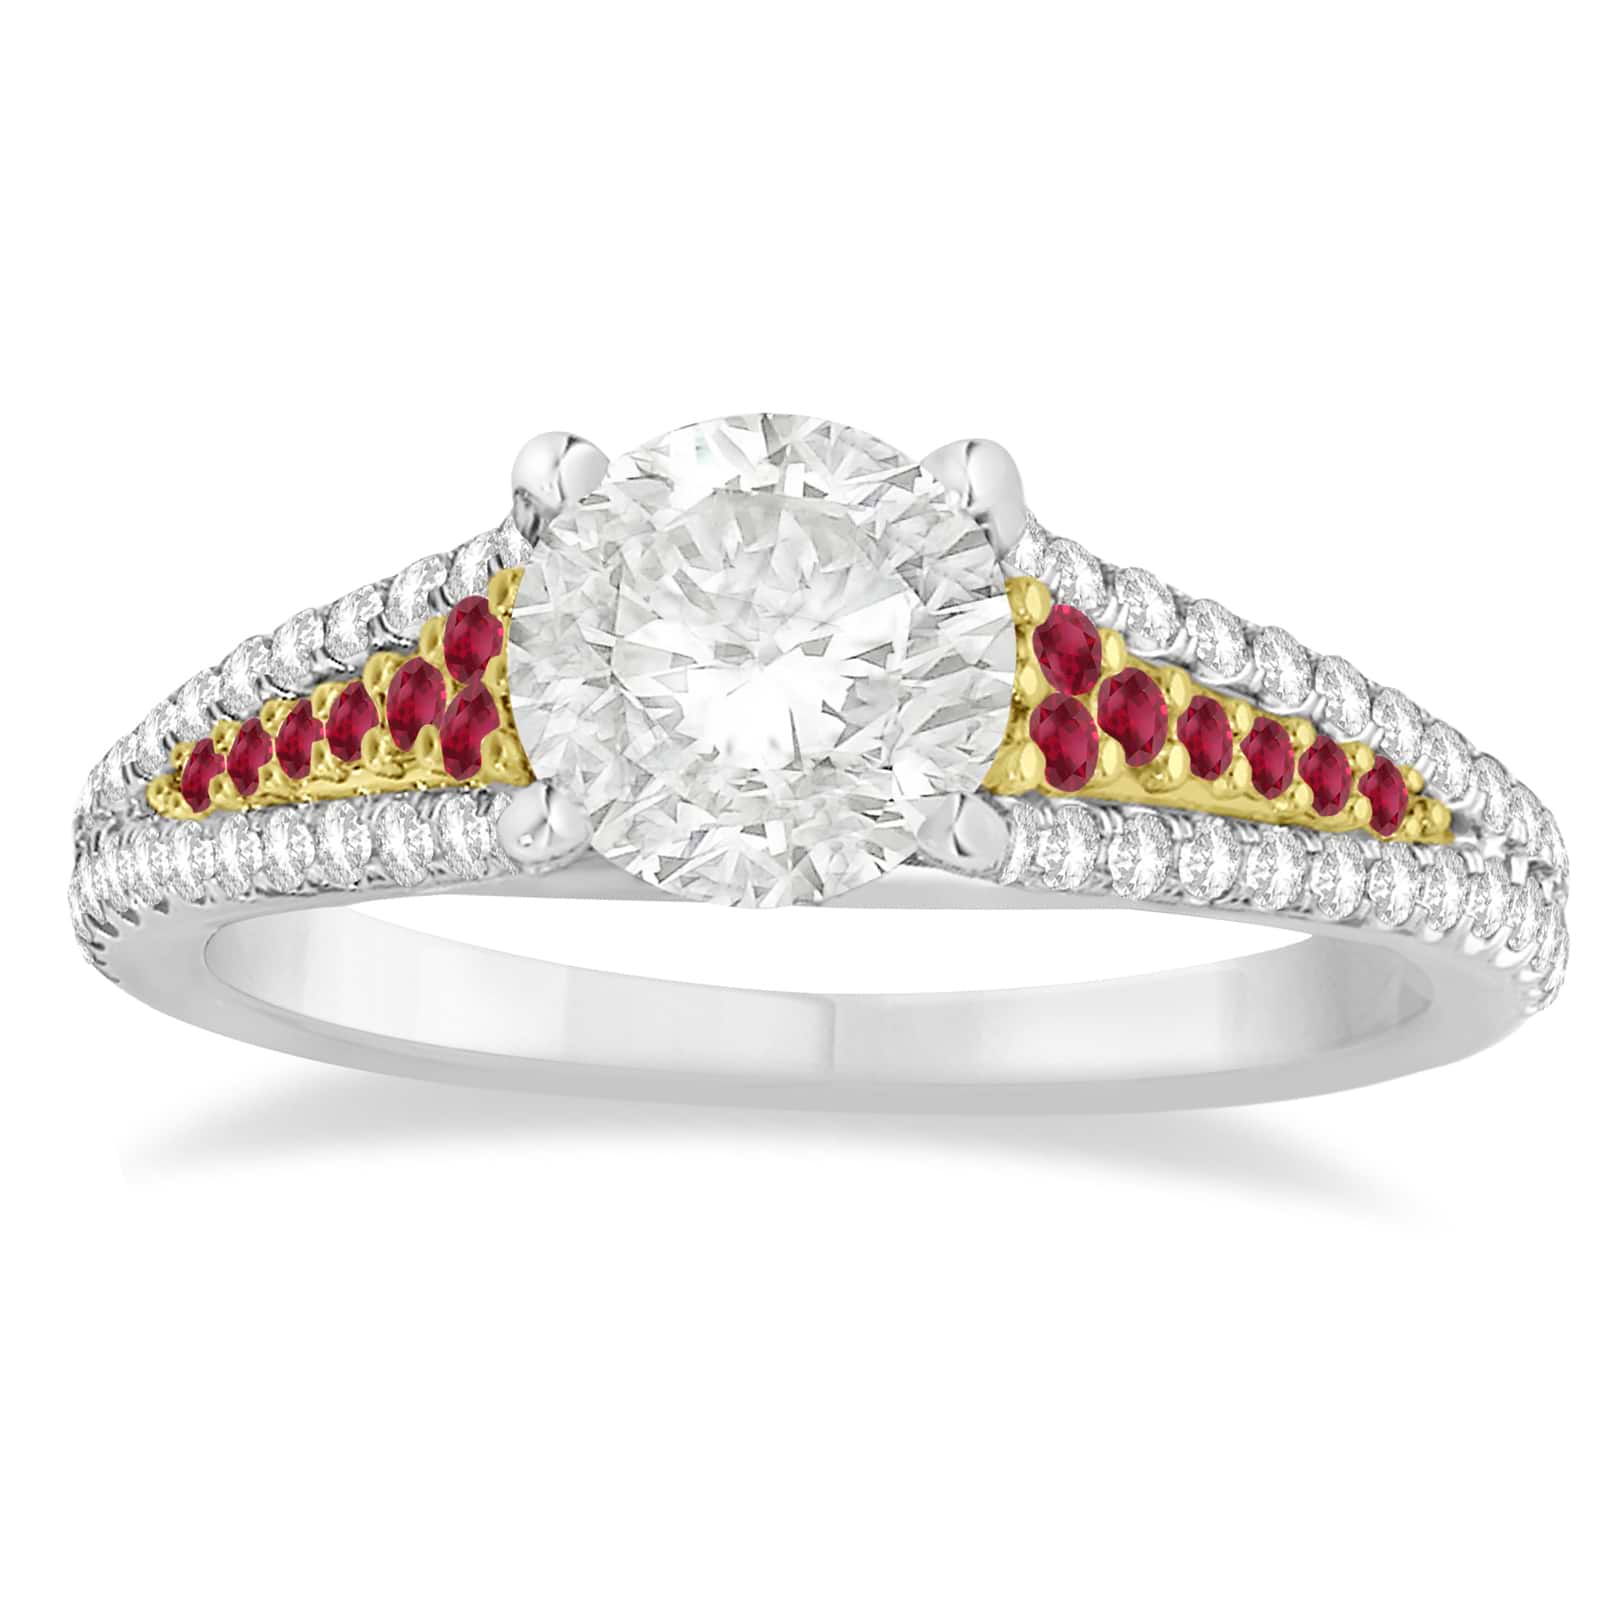 Ruby & Diamond Engagement Ring 14k Two Tone Gold (0.33ct)